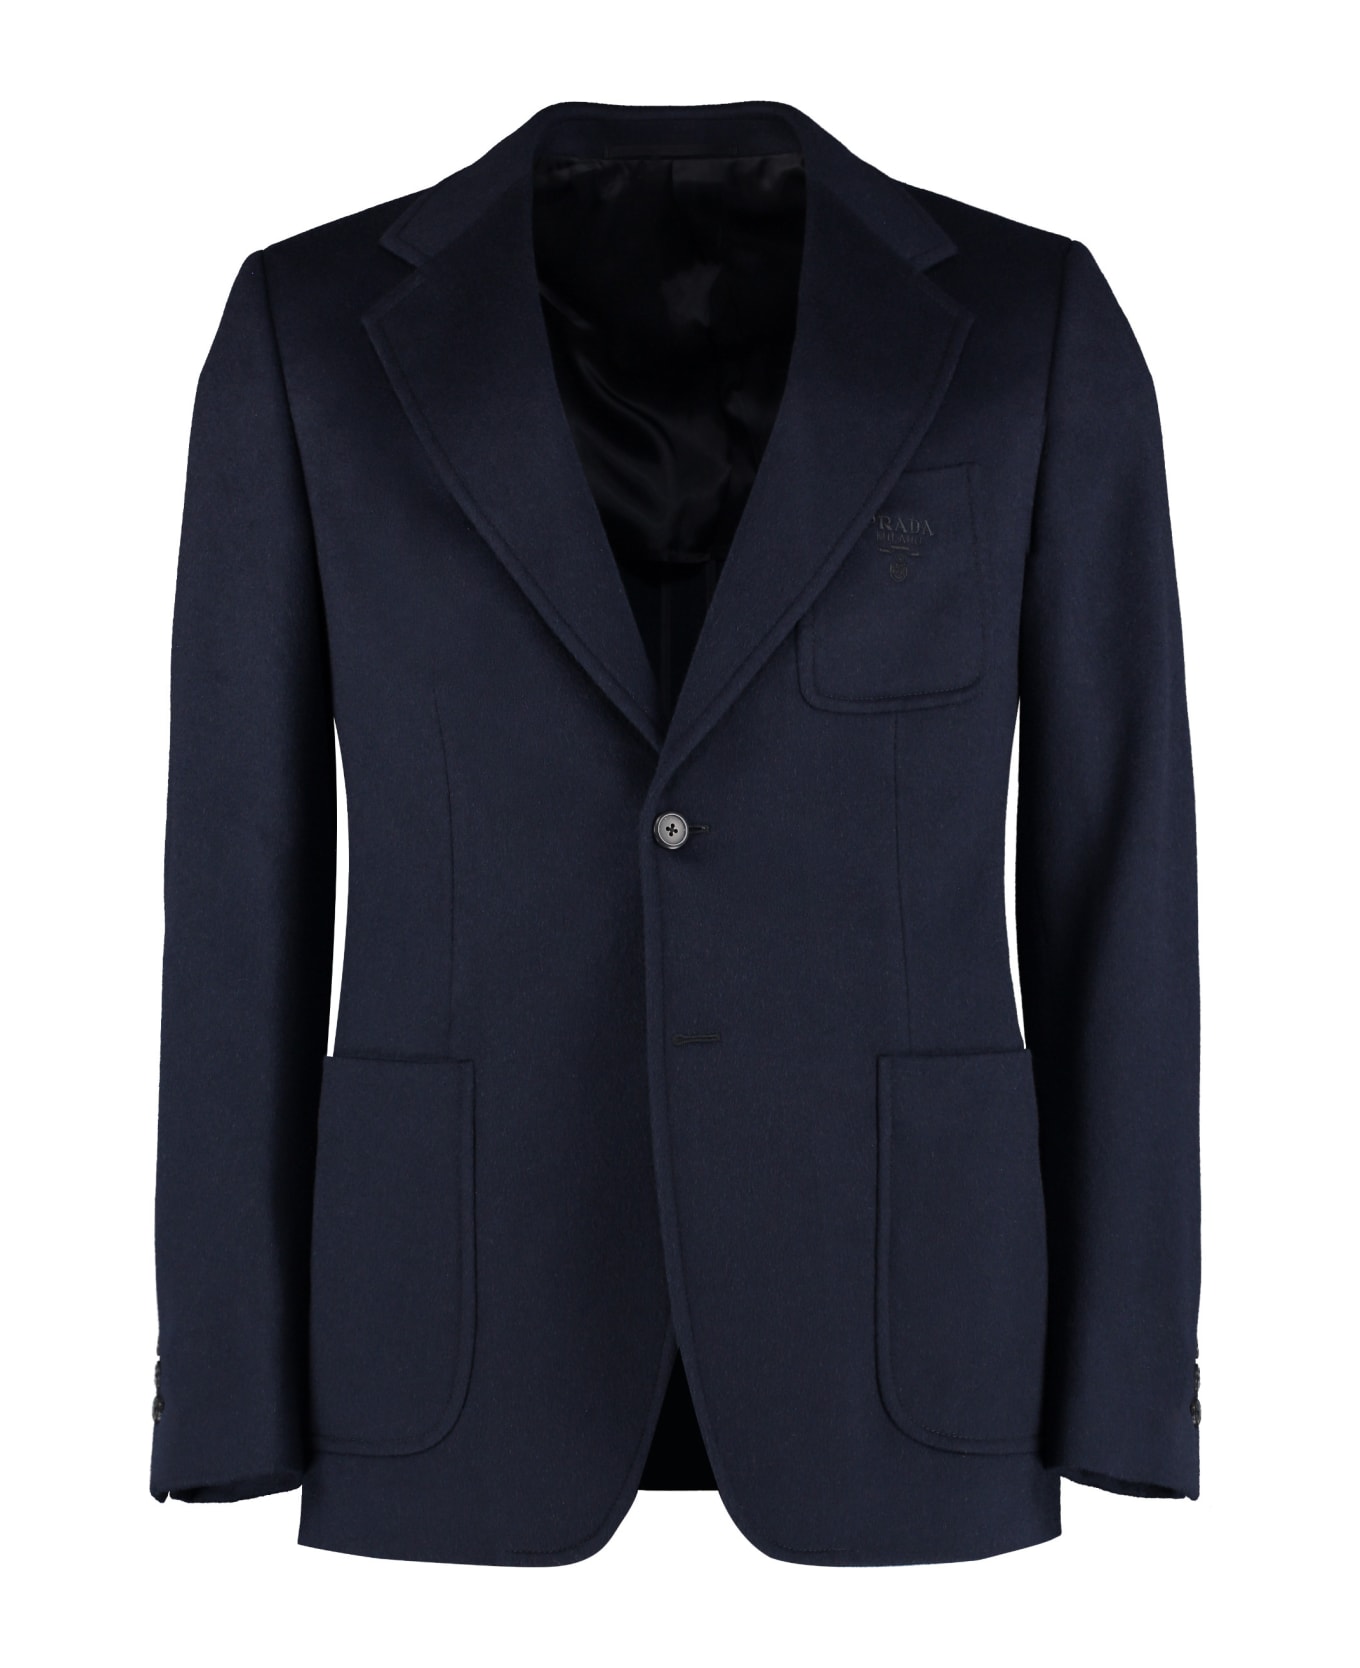 Prada Single-breasted Two-button Jacket - blue ブレザー